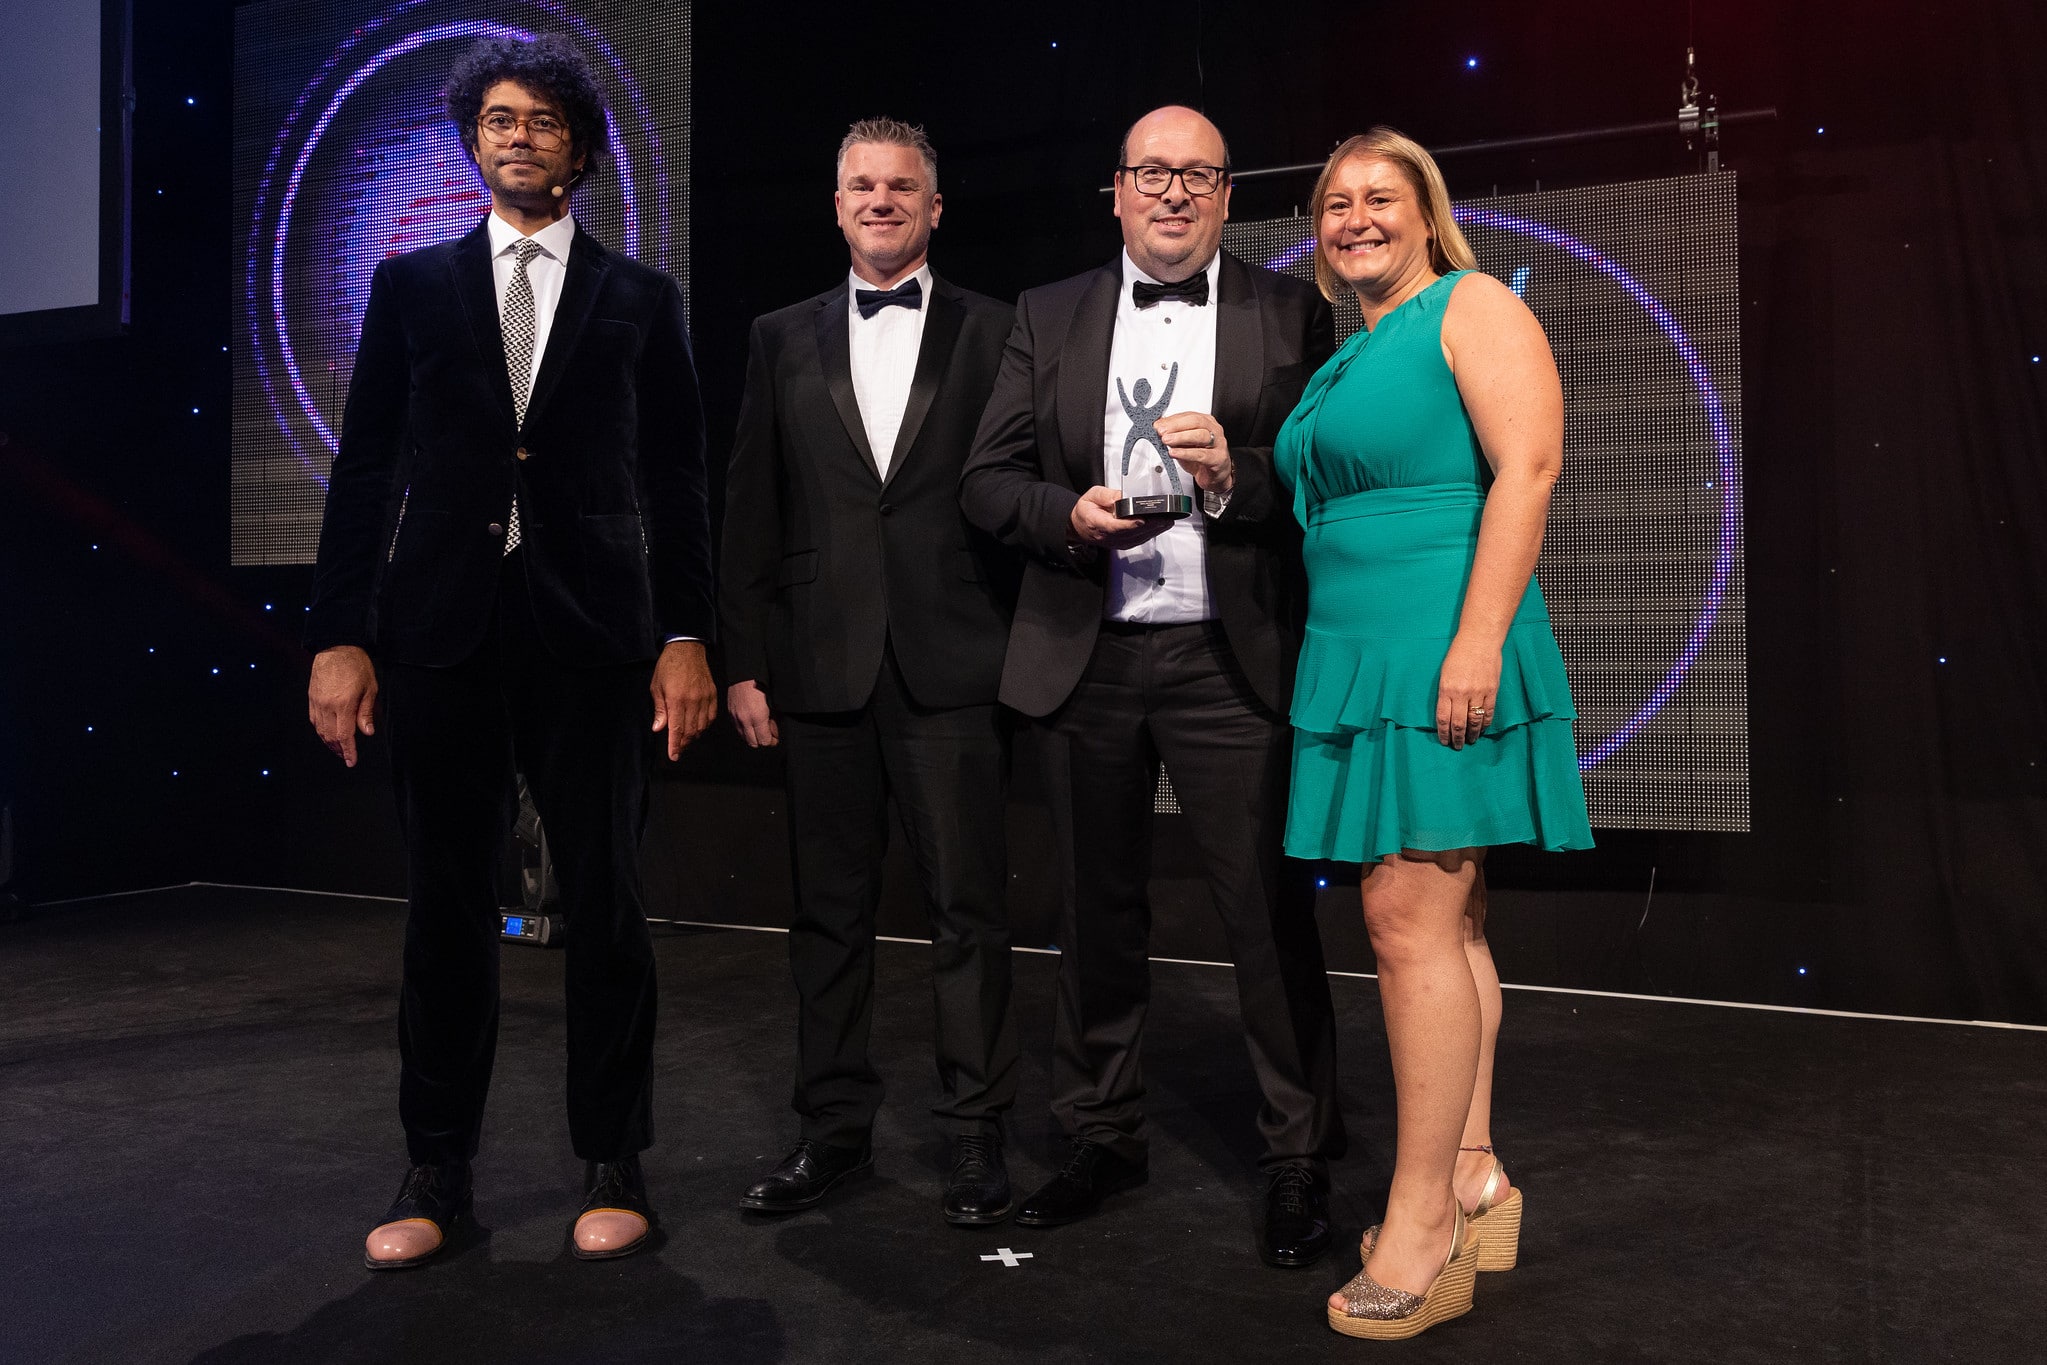 From left to right: presenter and comedian, Richard Ayoade; James Mackay, Group Sales Director for Autotech Group; Interim CEO, Simon King with the Recruiter magazine representative